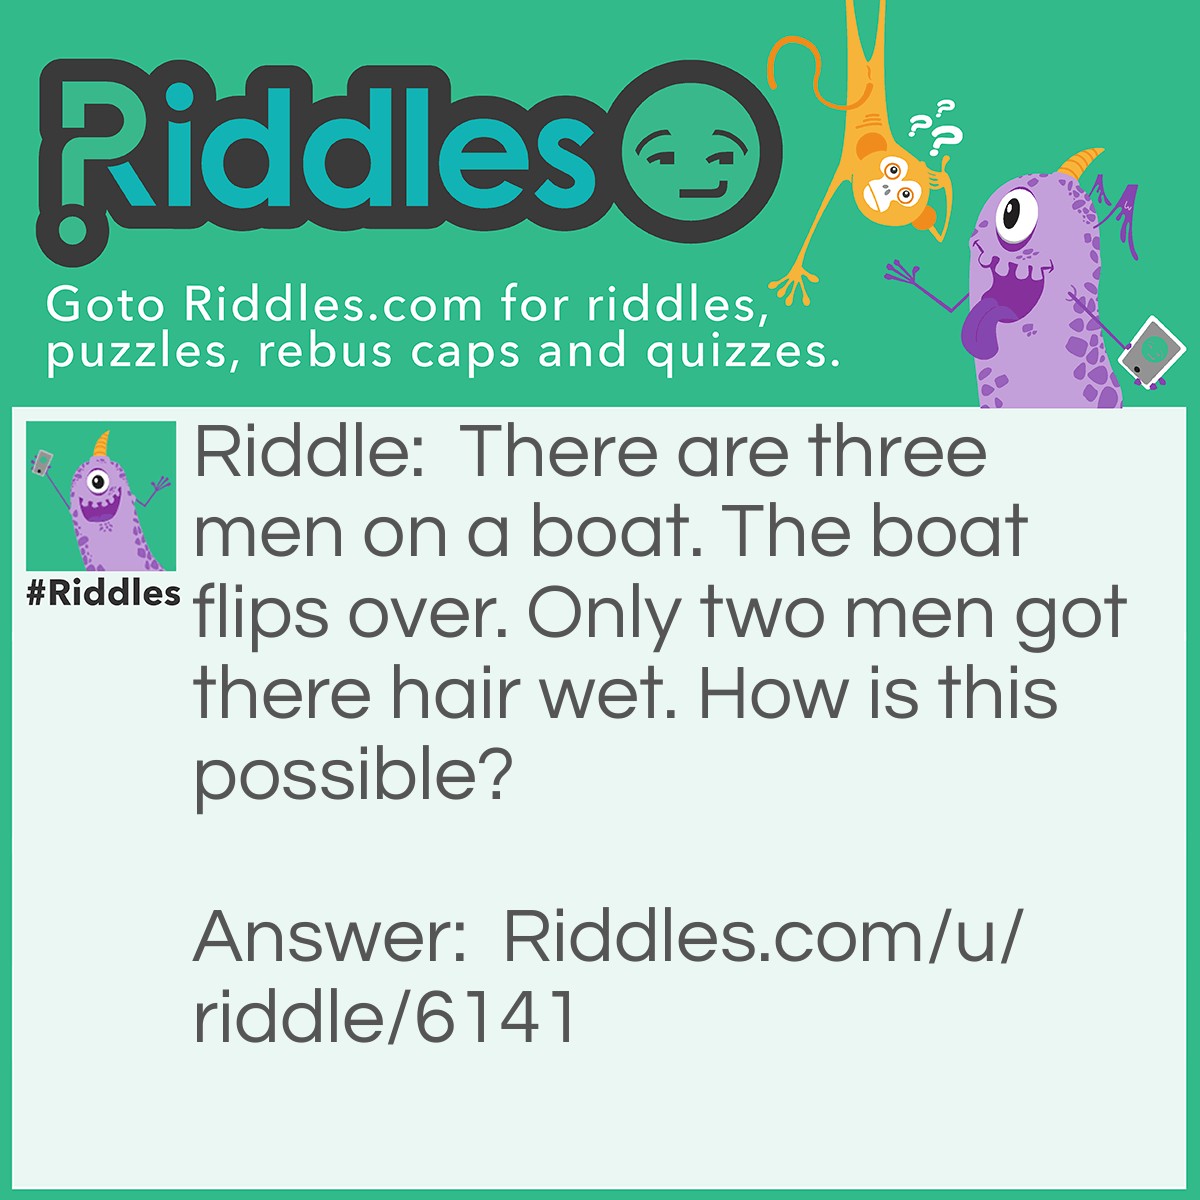 Riddle: There are three men on a boat. The boat flips over. Only two men got there hair wet. How is this possible? Answer: The other guy was bald, so he could not get his hair wet.